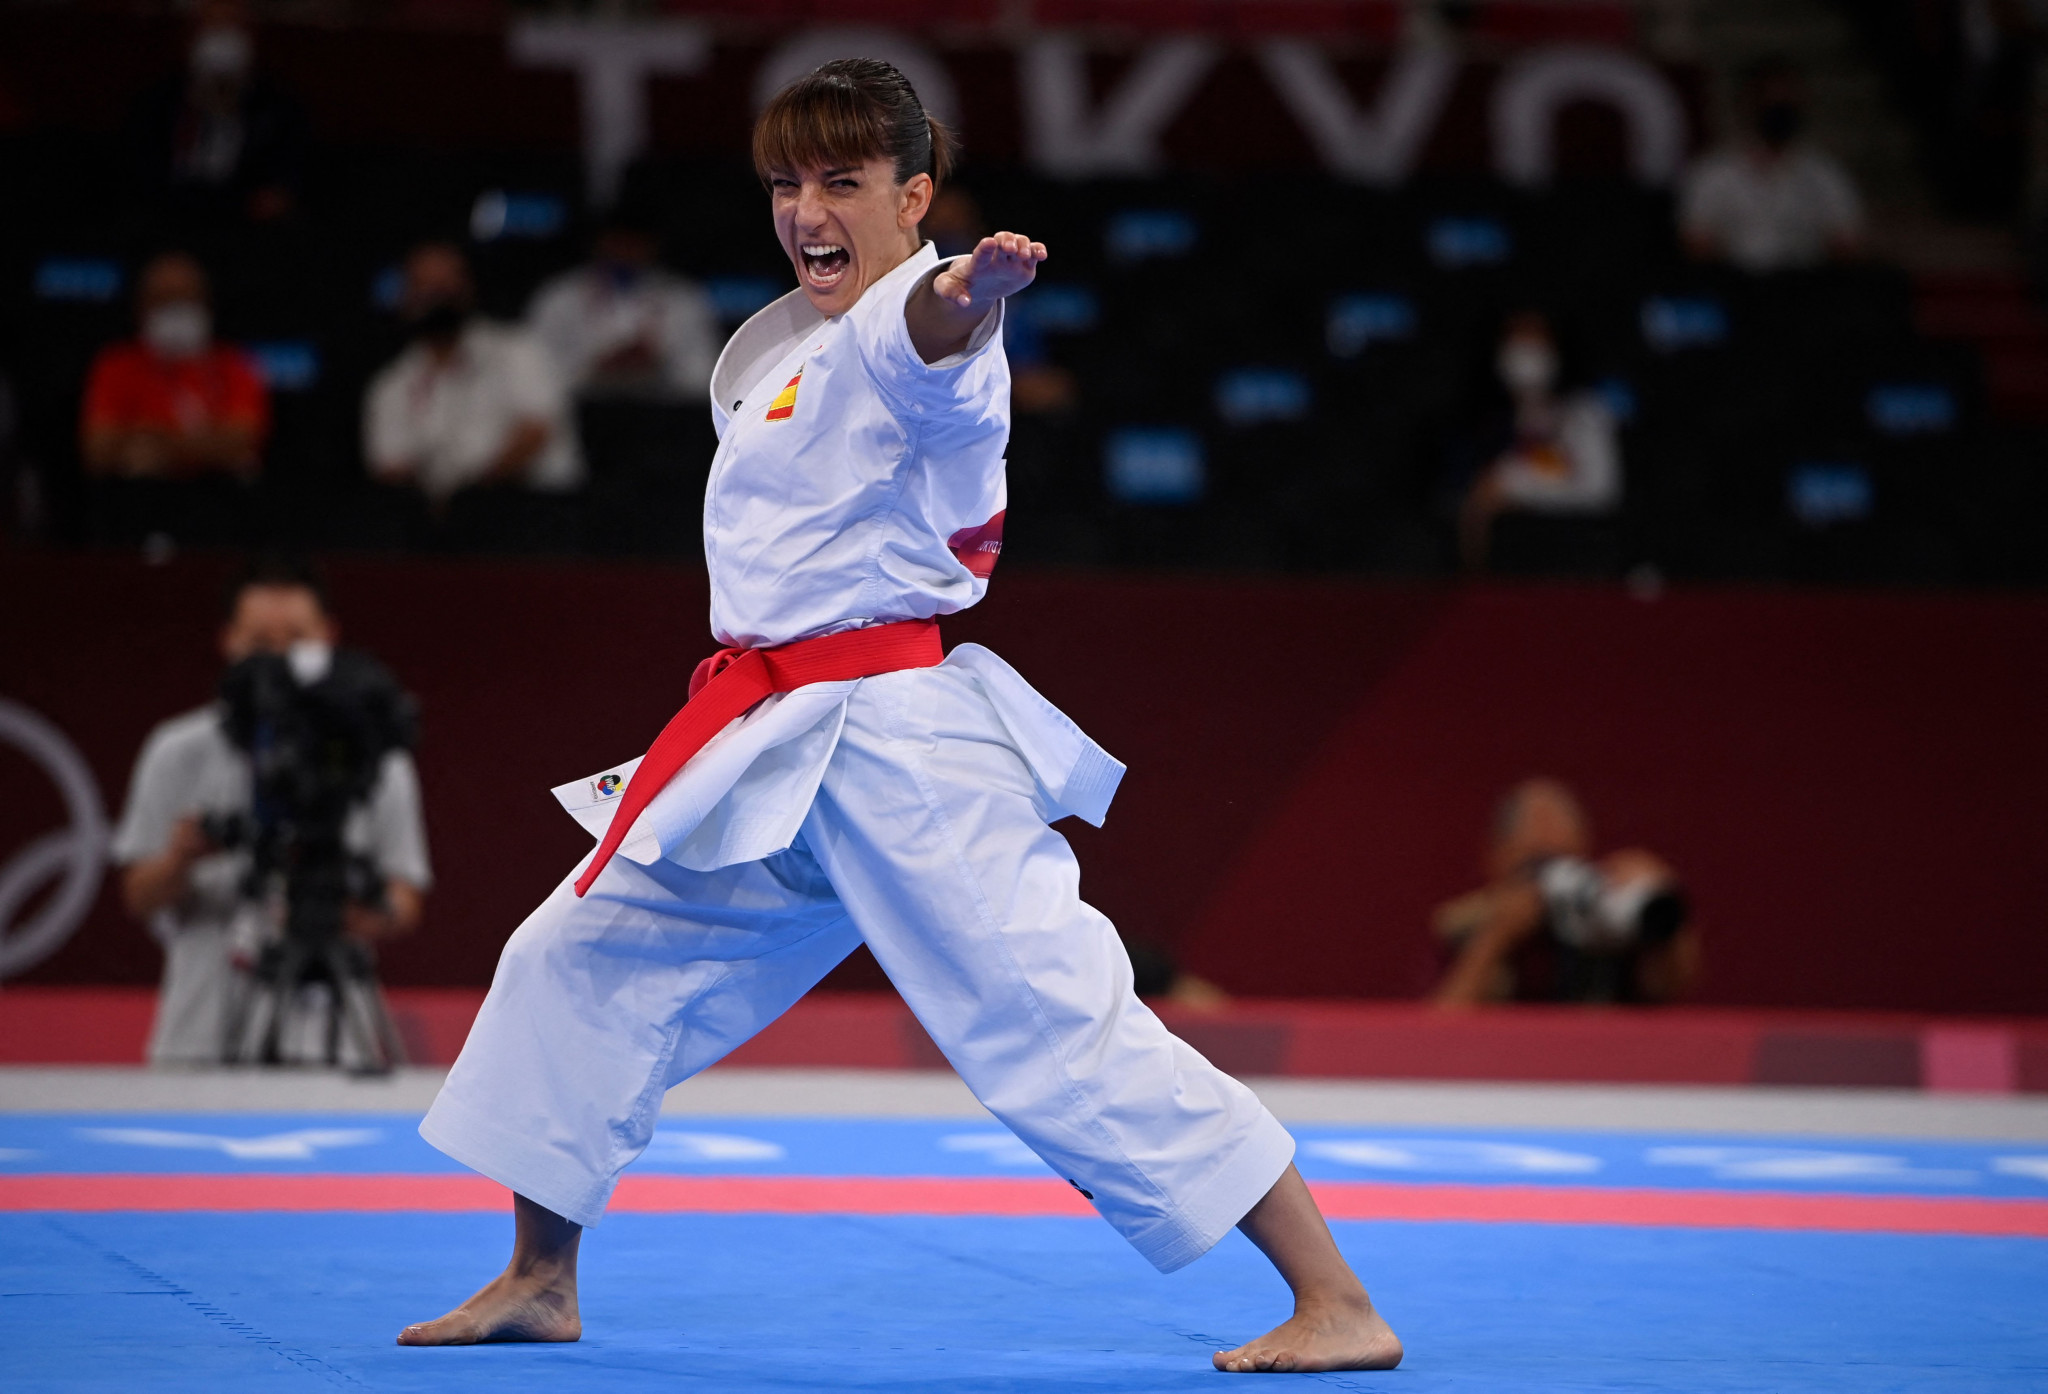 Spain's Olympic karate gold medallist Sandra Sánchez provided the opening for the signing of the extended agreement ©Getty Images